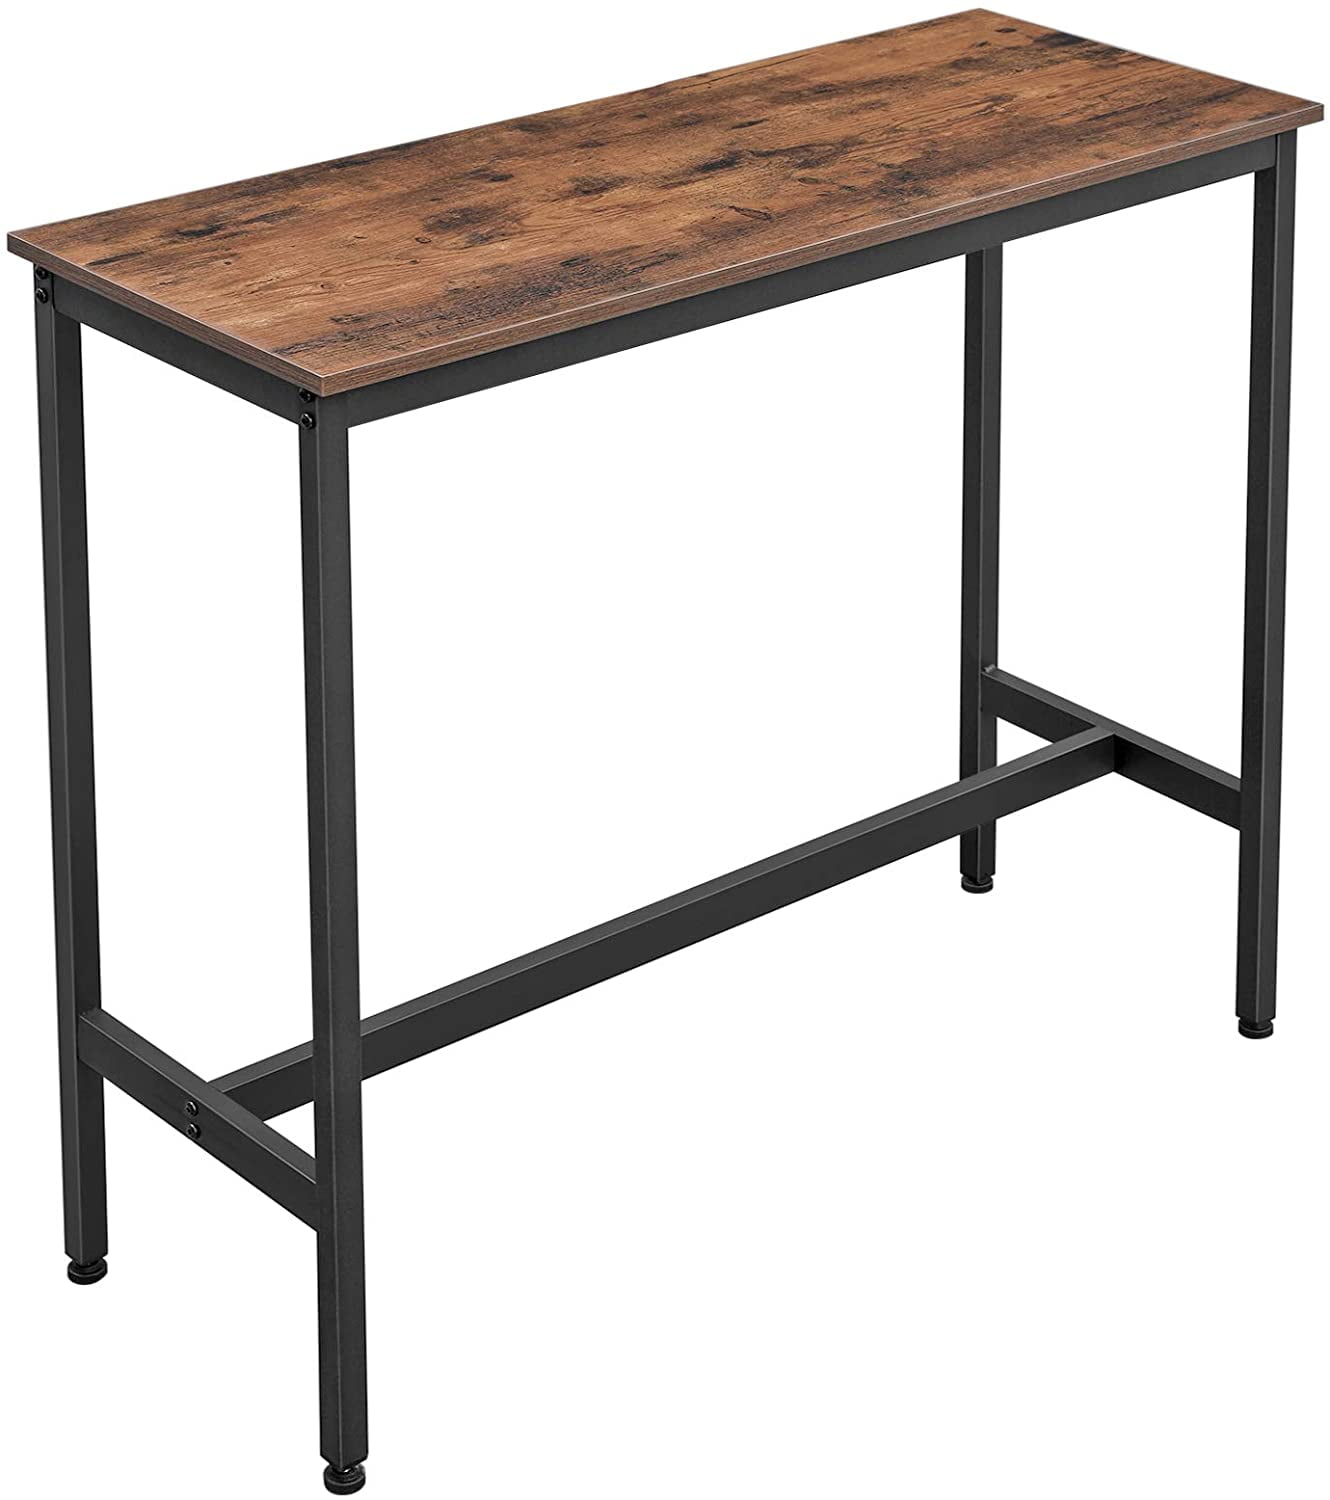 Sturdy Metal Frame HOOBRO Bar Table High Rectangular Kitchen Pub Dining Coffee Table Rustic Brown EBF60BT01 Dining Room for Living Room Industrial Kitchen Table with 3 Storage Shelves